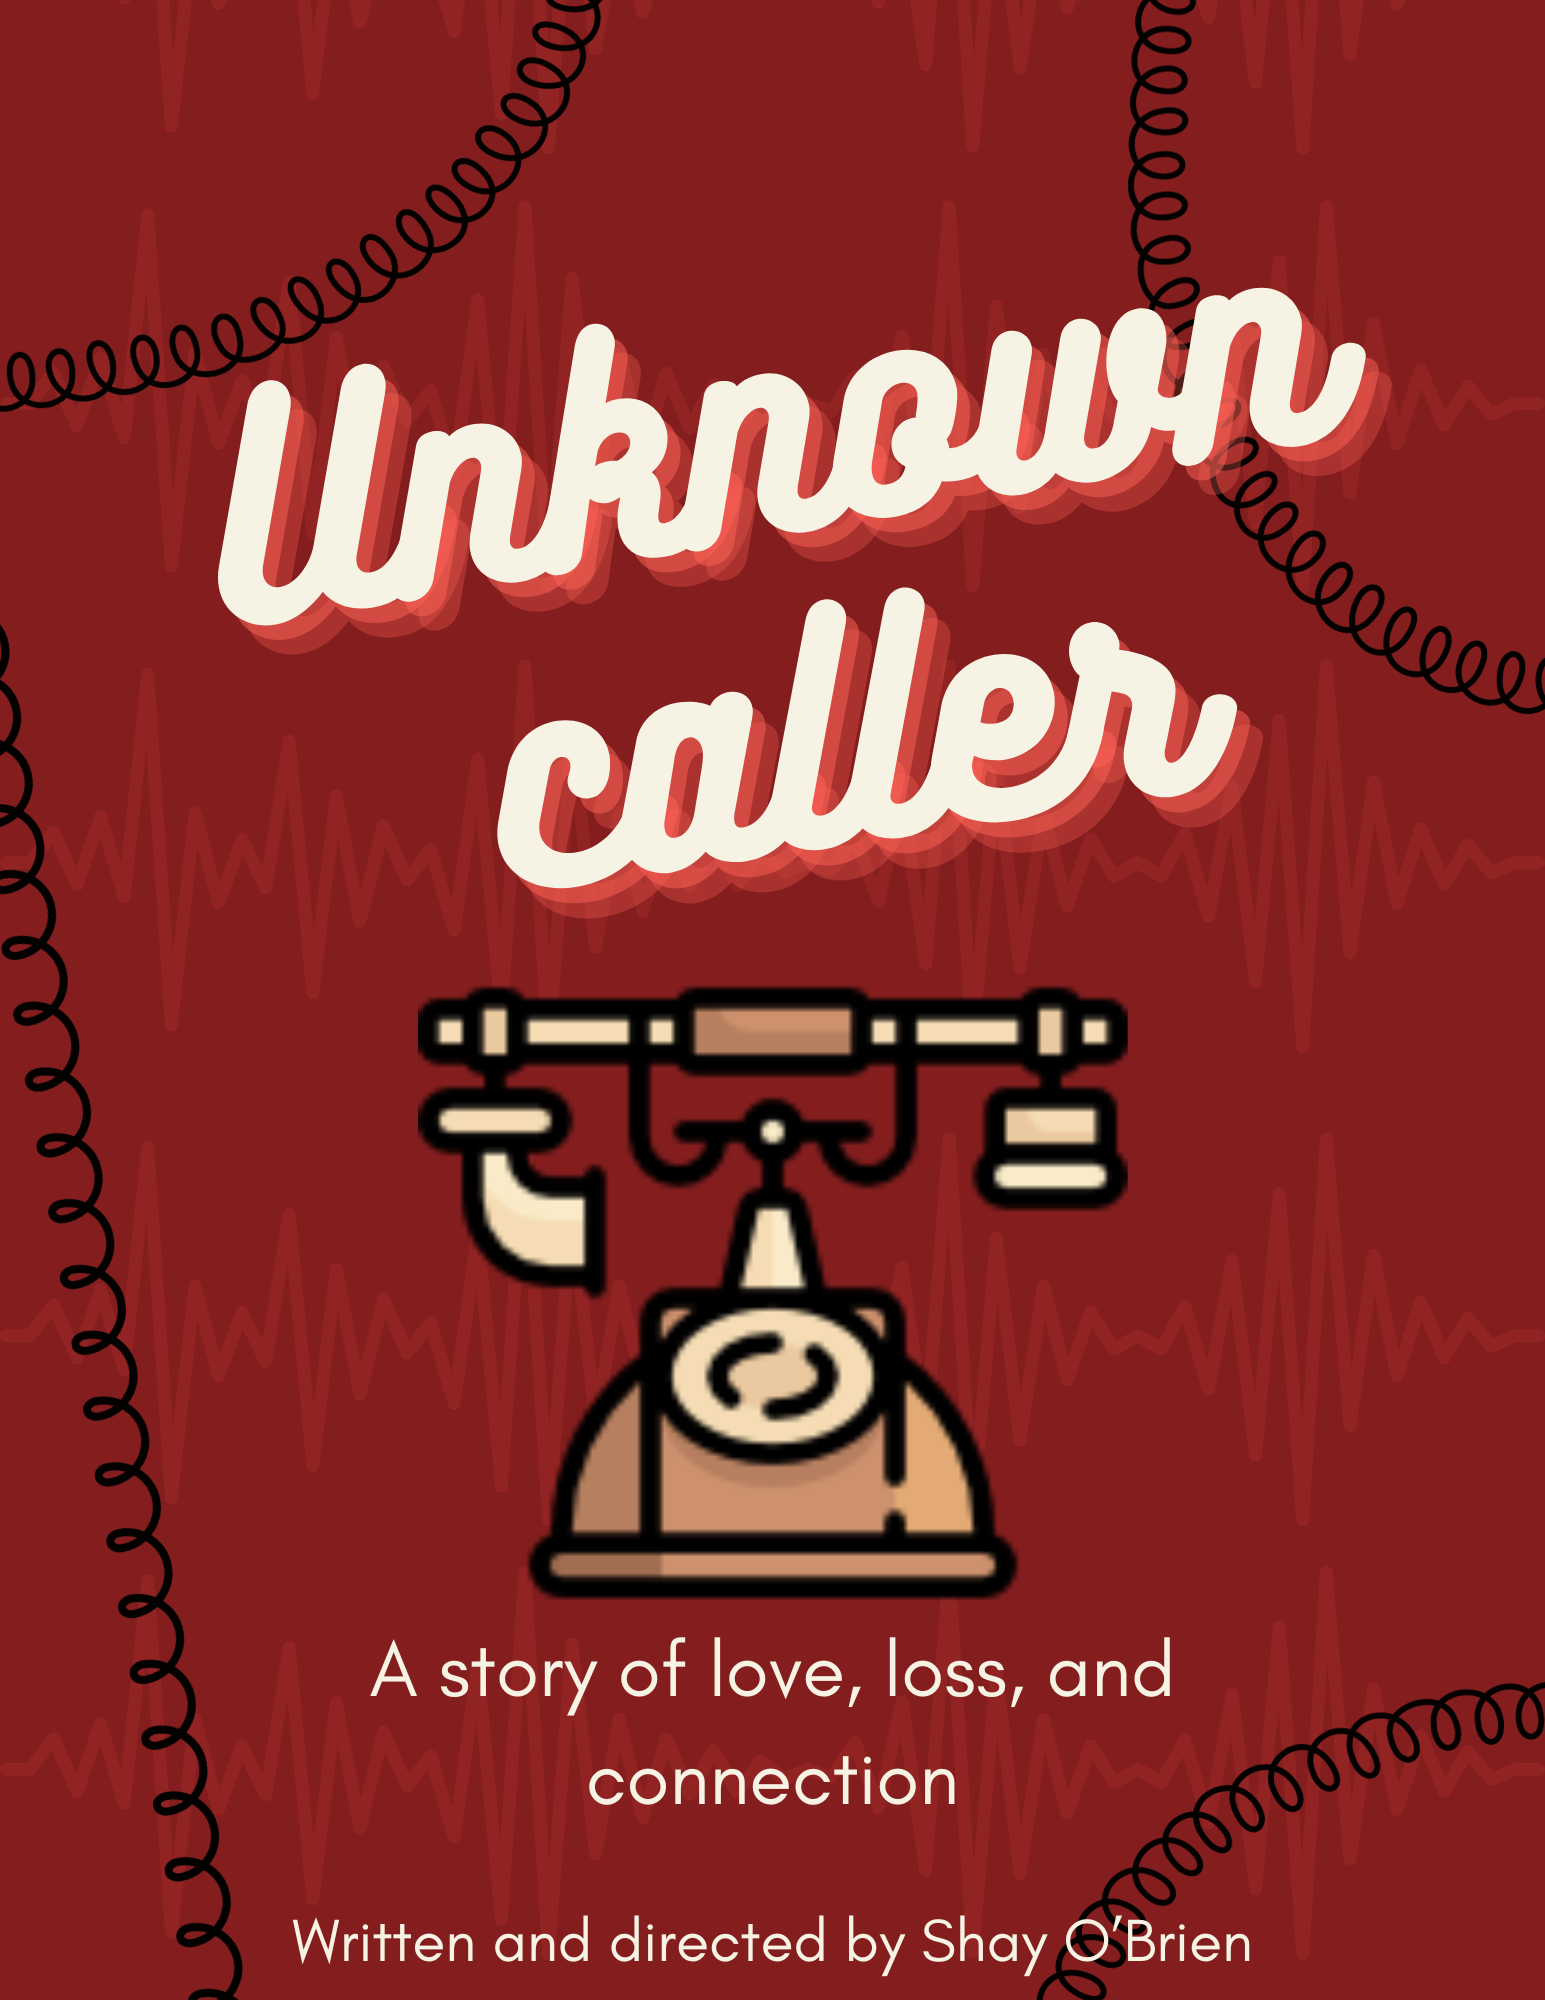 Poster for 'Unknown Caller'. The playwright and director is noted.